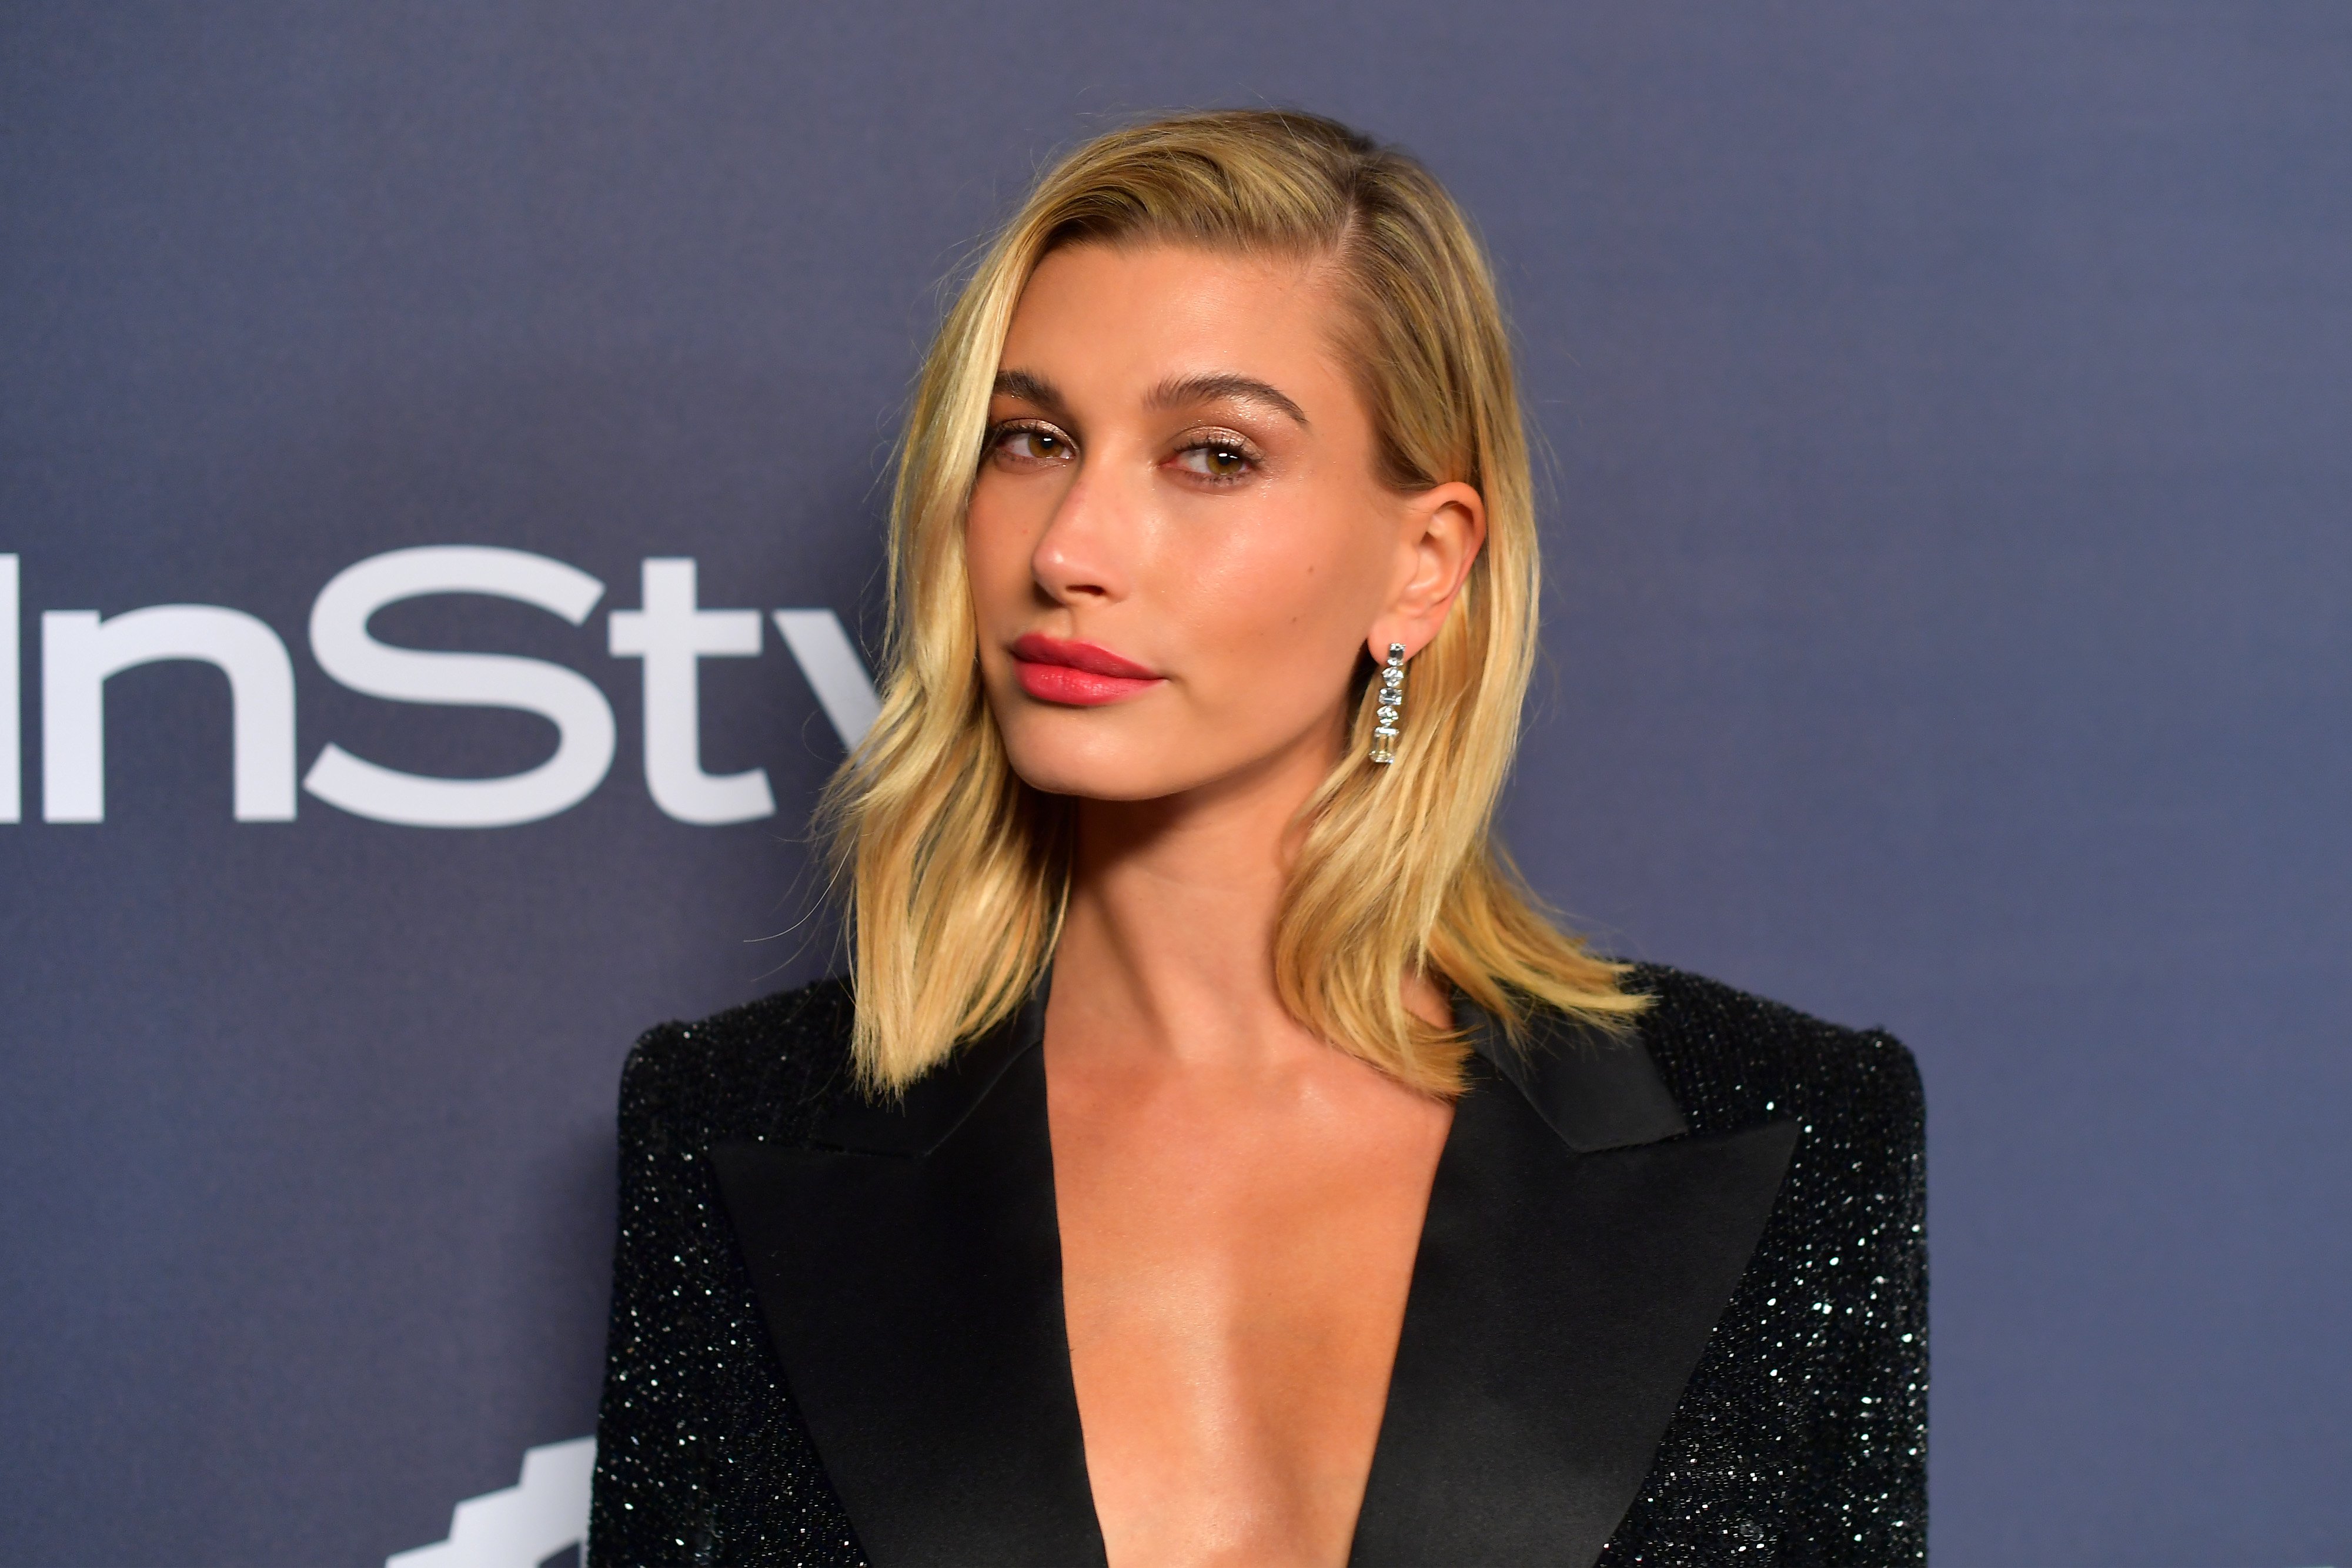 Hailey Baldwin Bieber smirking with a black sequined outfit and red lipstick.